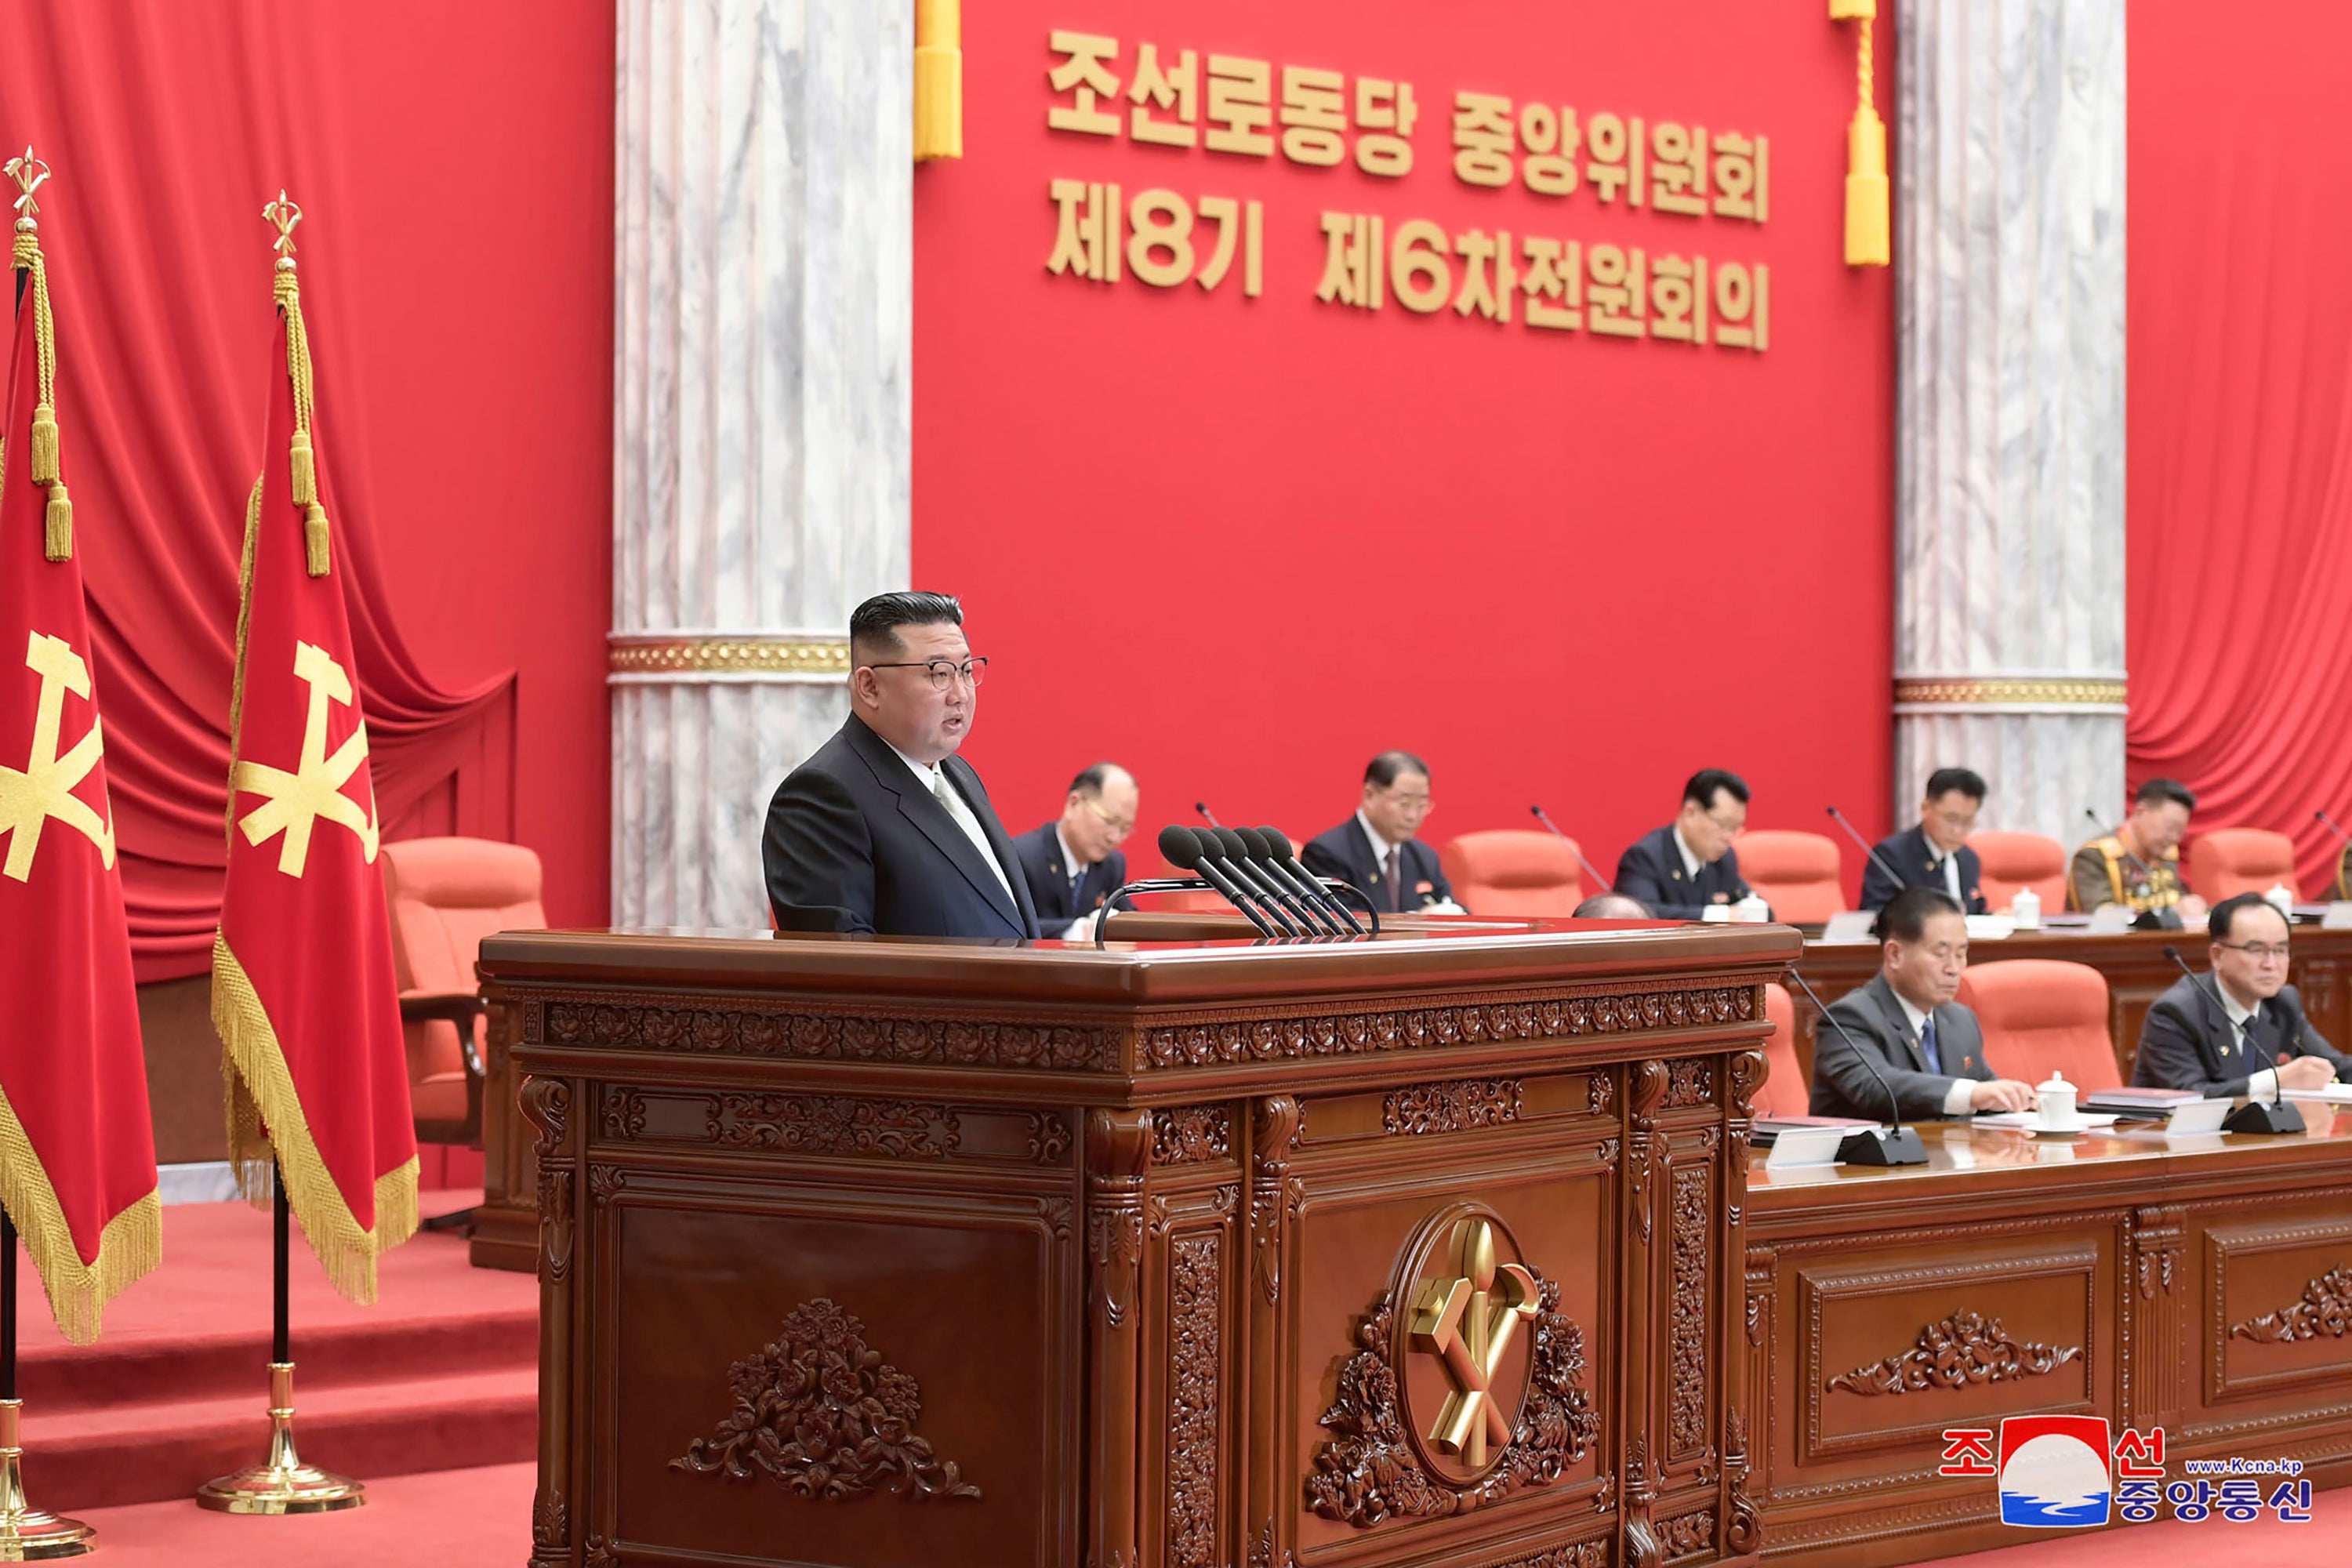 Kim Jong-un at a plenary meeting of the Workers’ Party of Korea in Pyongyang